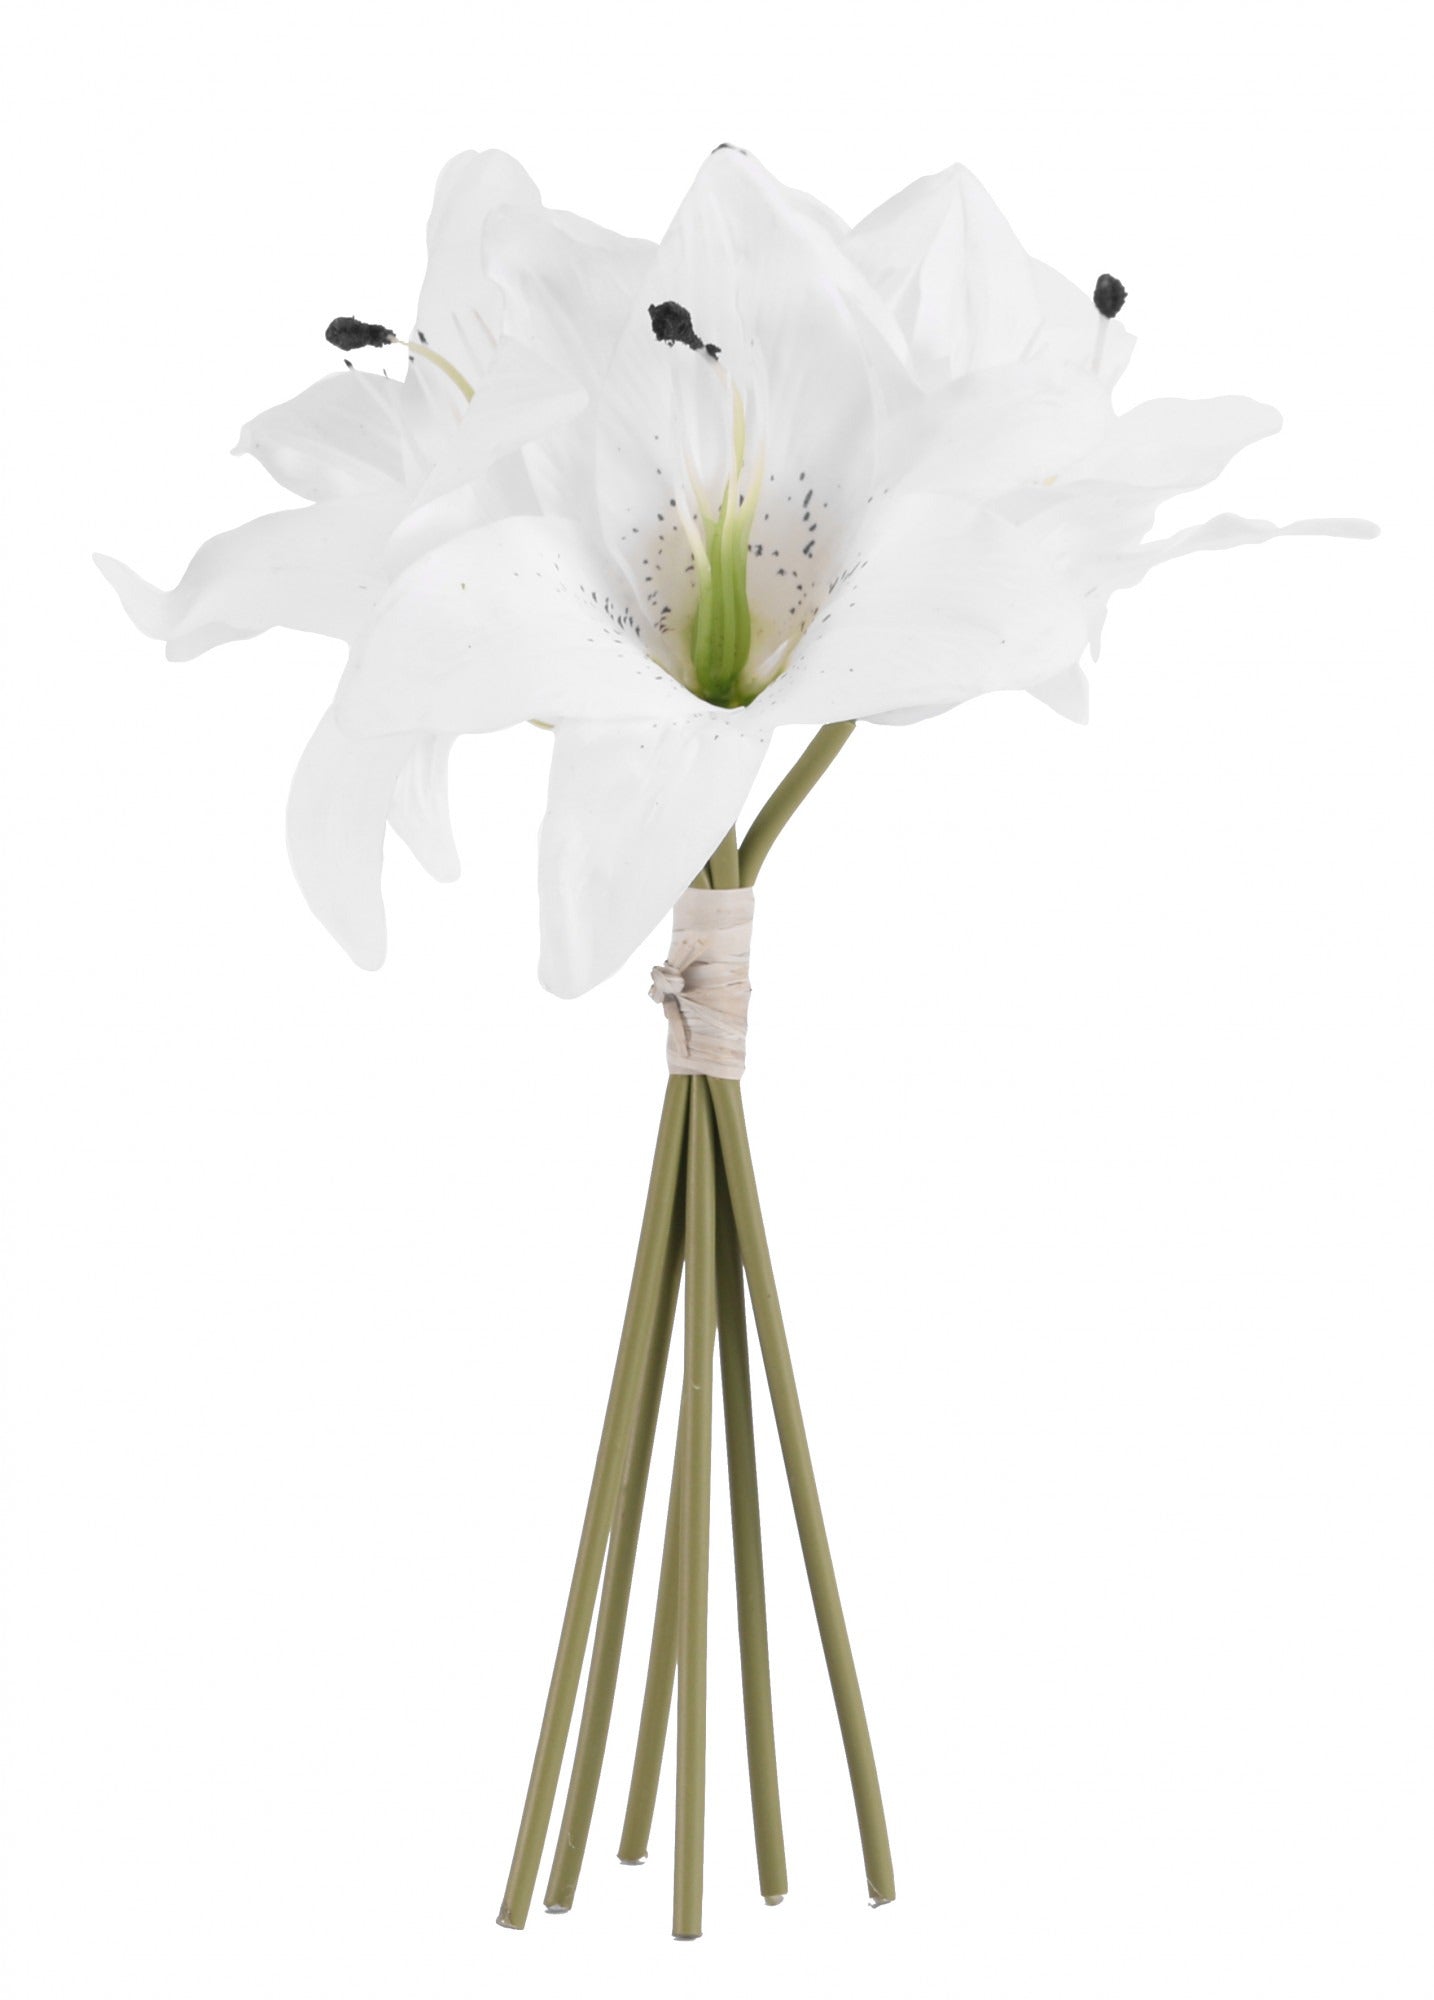 View White Lily Bouquet information